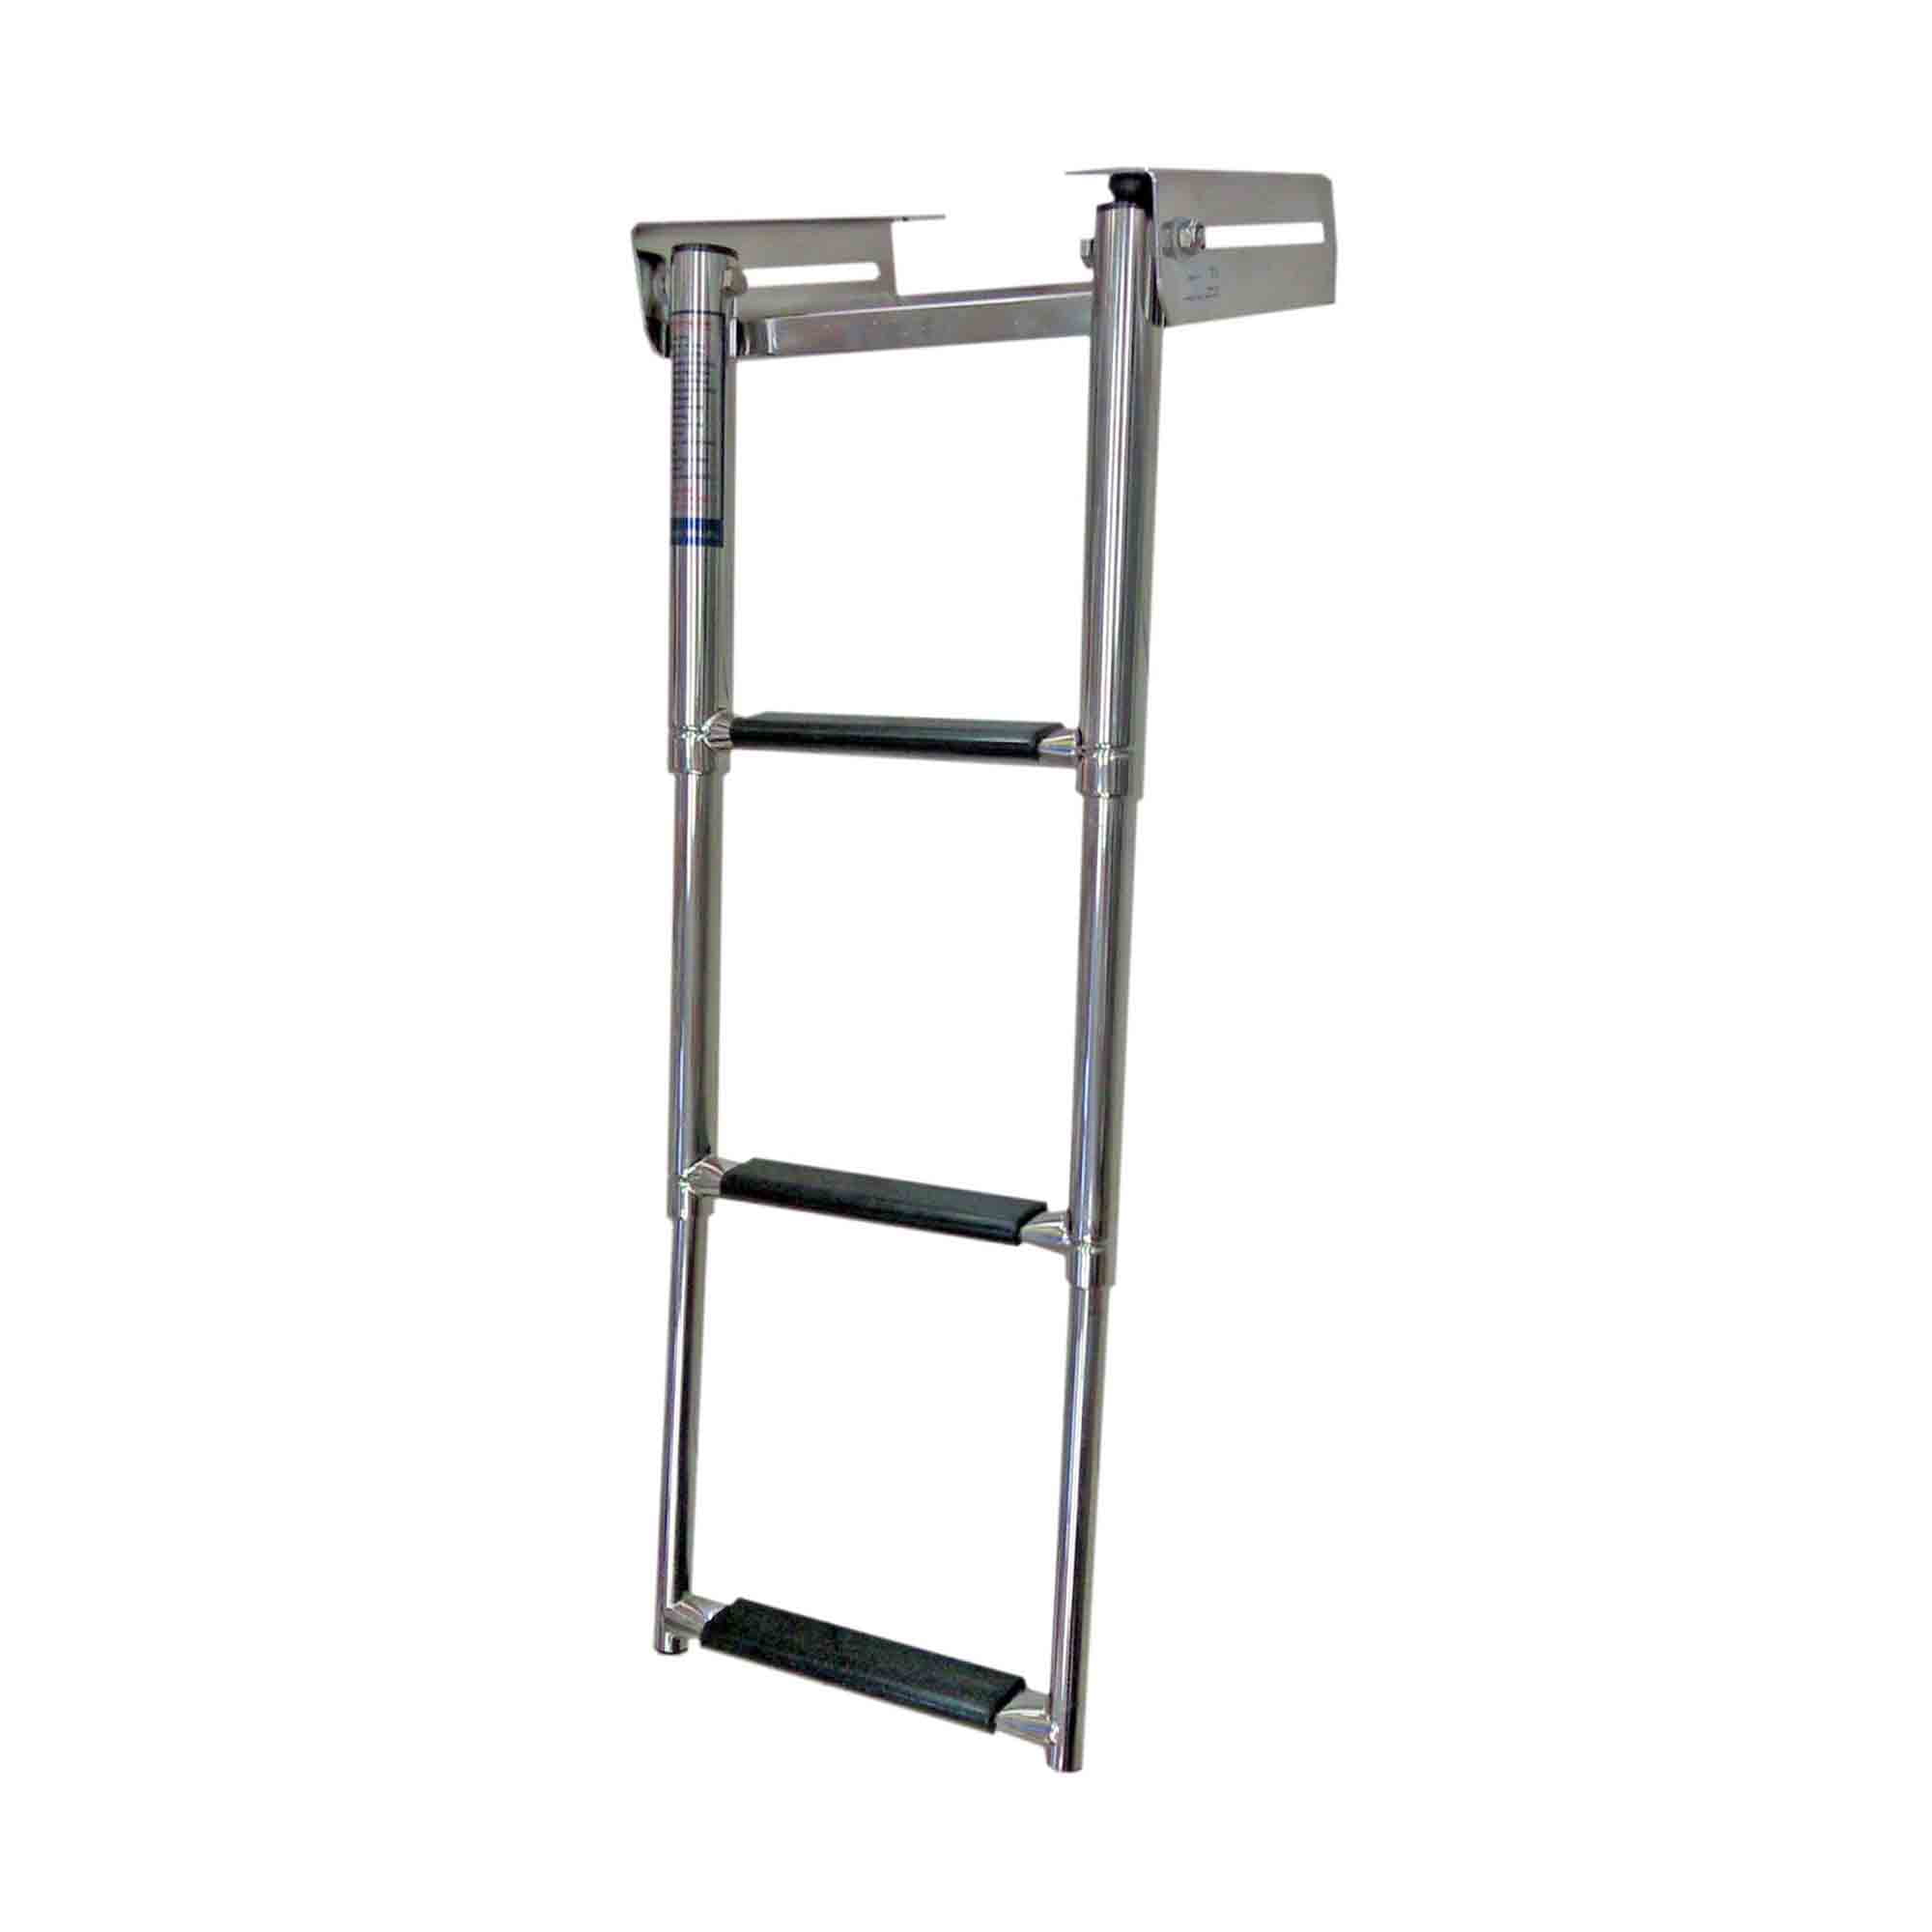 4 Step Boat Over Platform Telescoping Ladder, Stainless Steel - FO4503